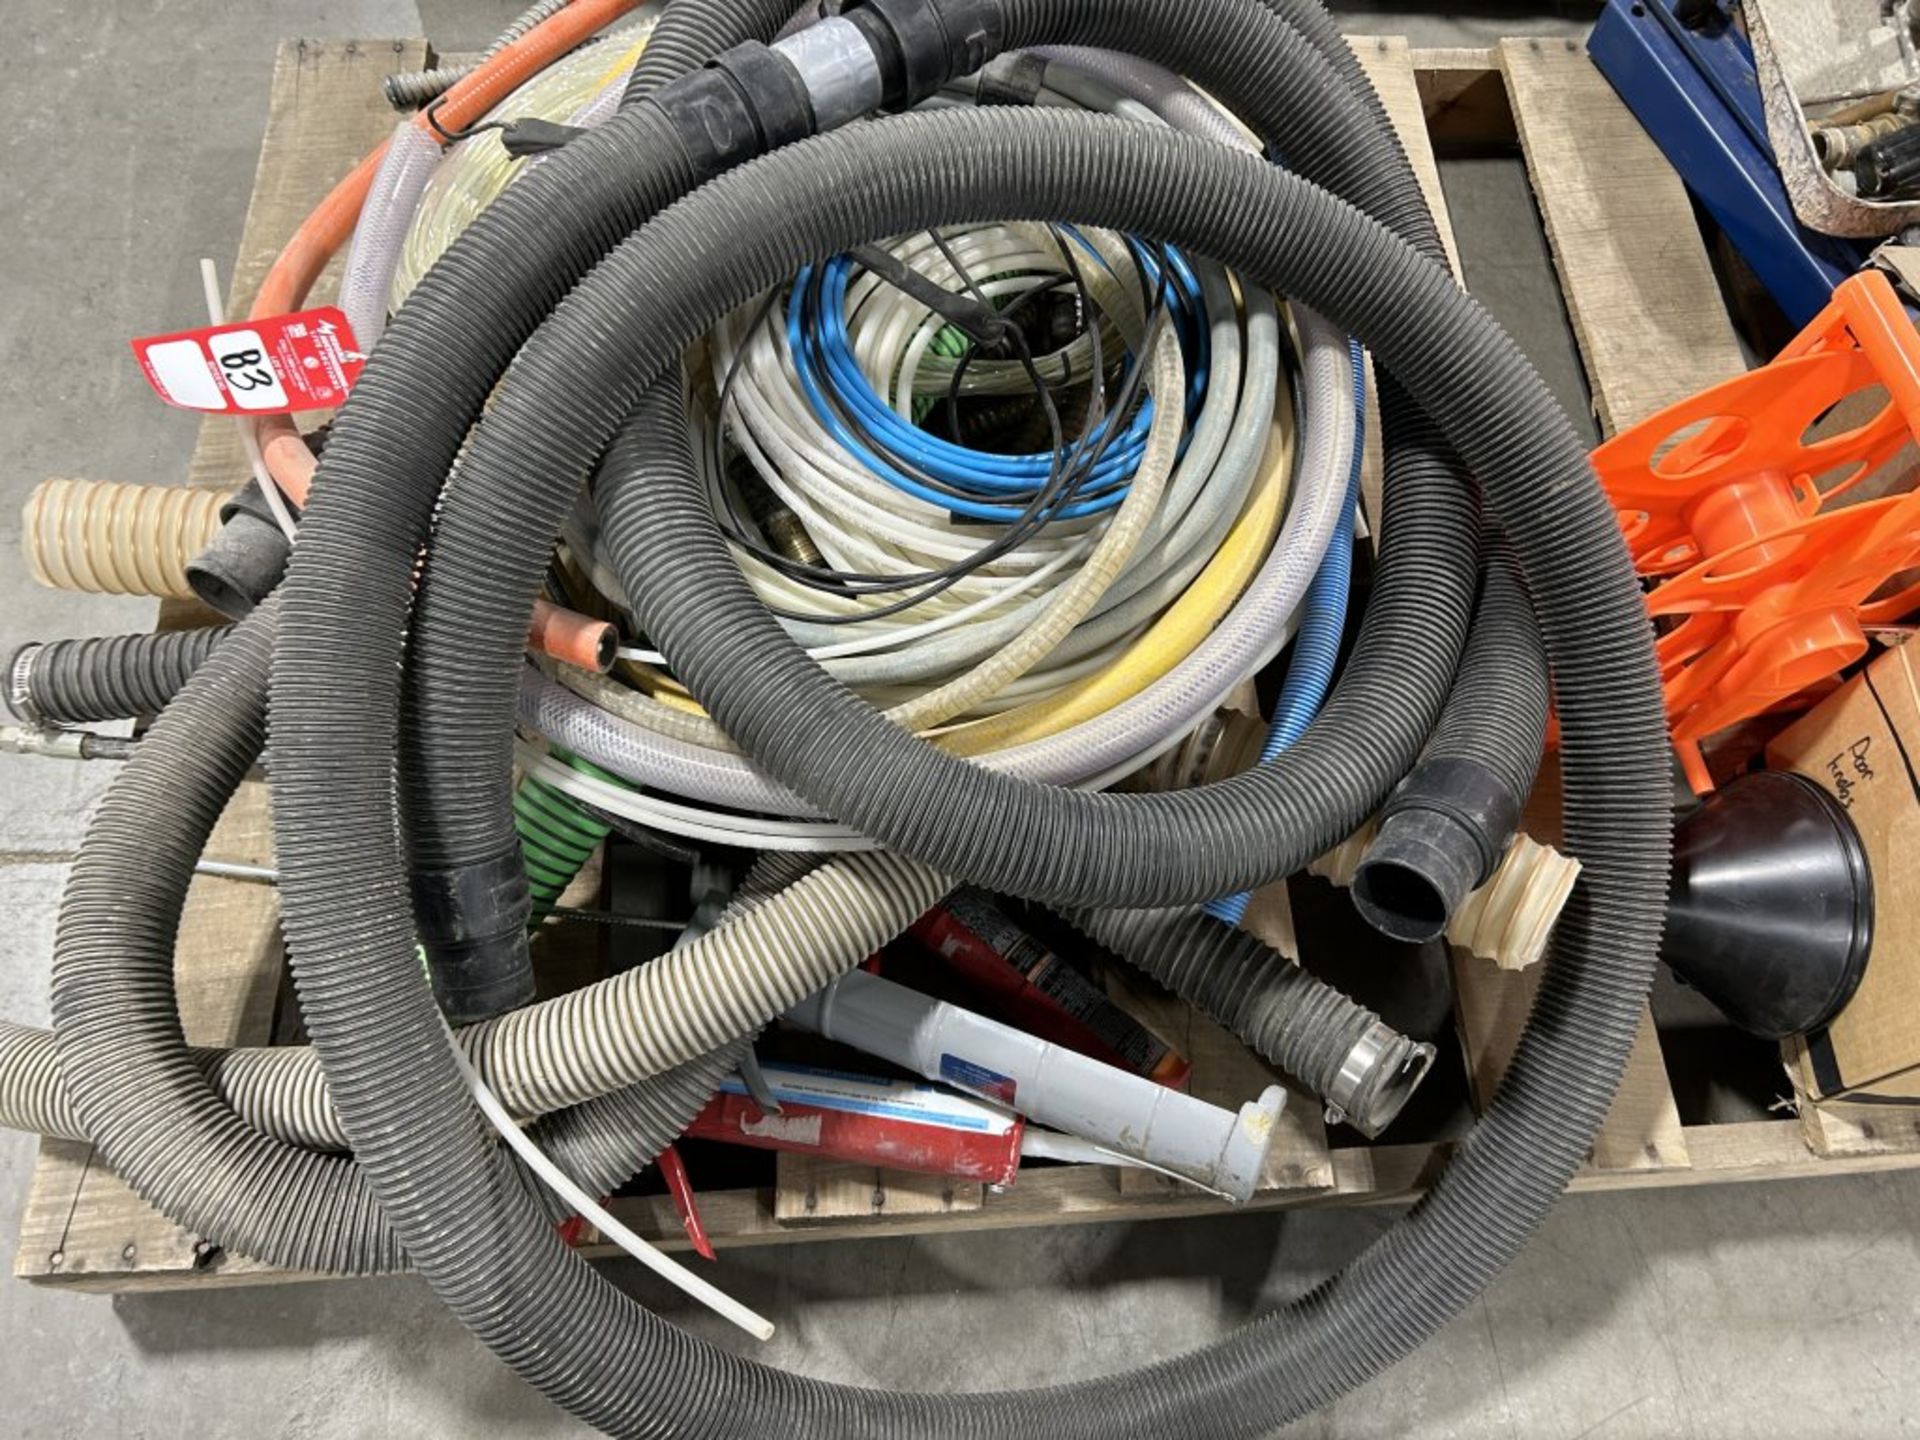 PALLET FULL OF ASSORTED HOSES, VARIOUS SIZES, WITH ASSORTED FUNNELS, PARTS, PIECES, TACK LIFE 2- - Image 3 of 9